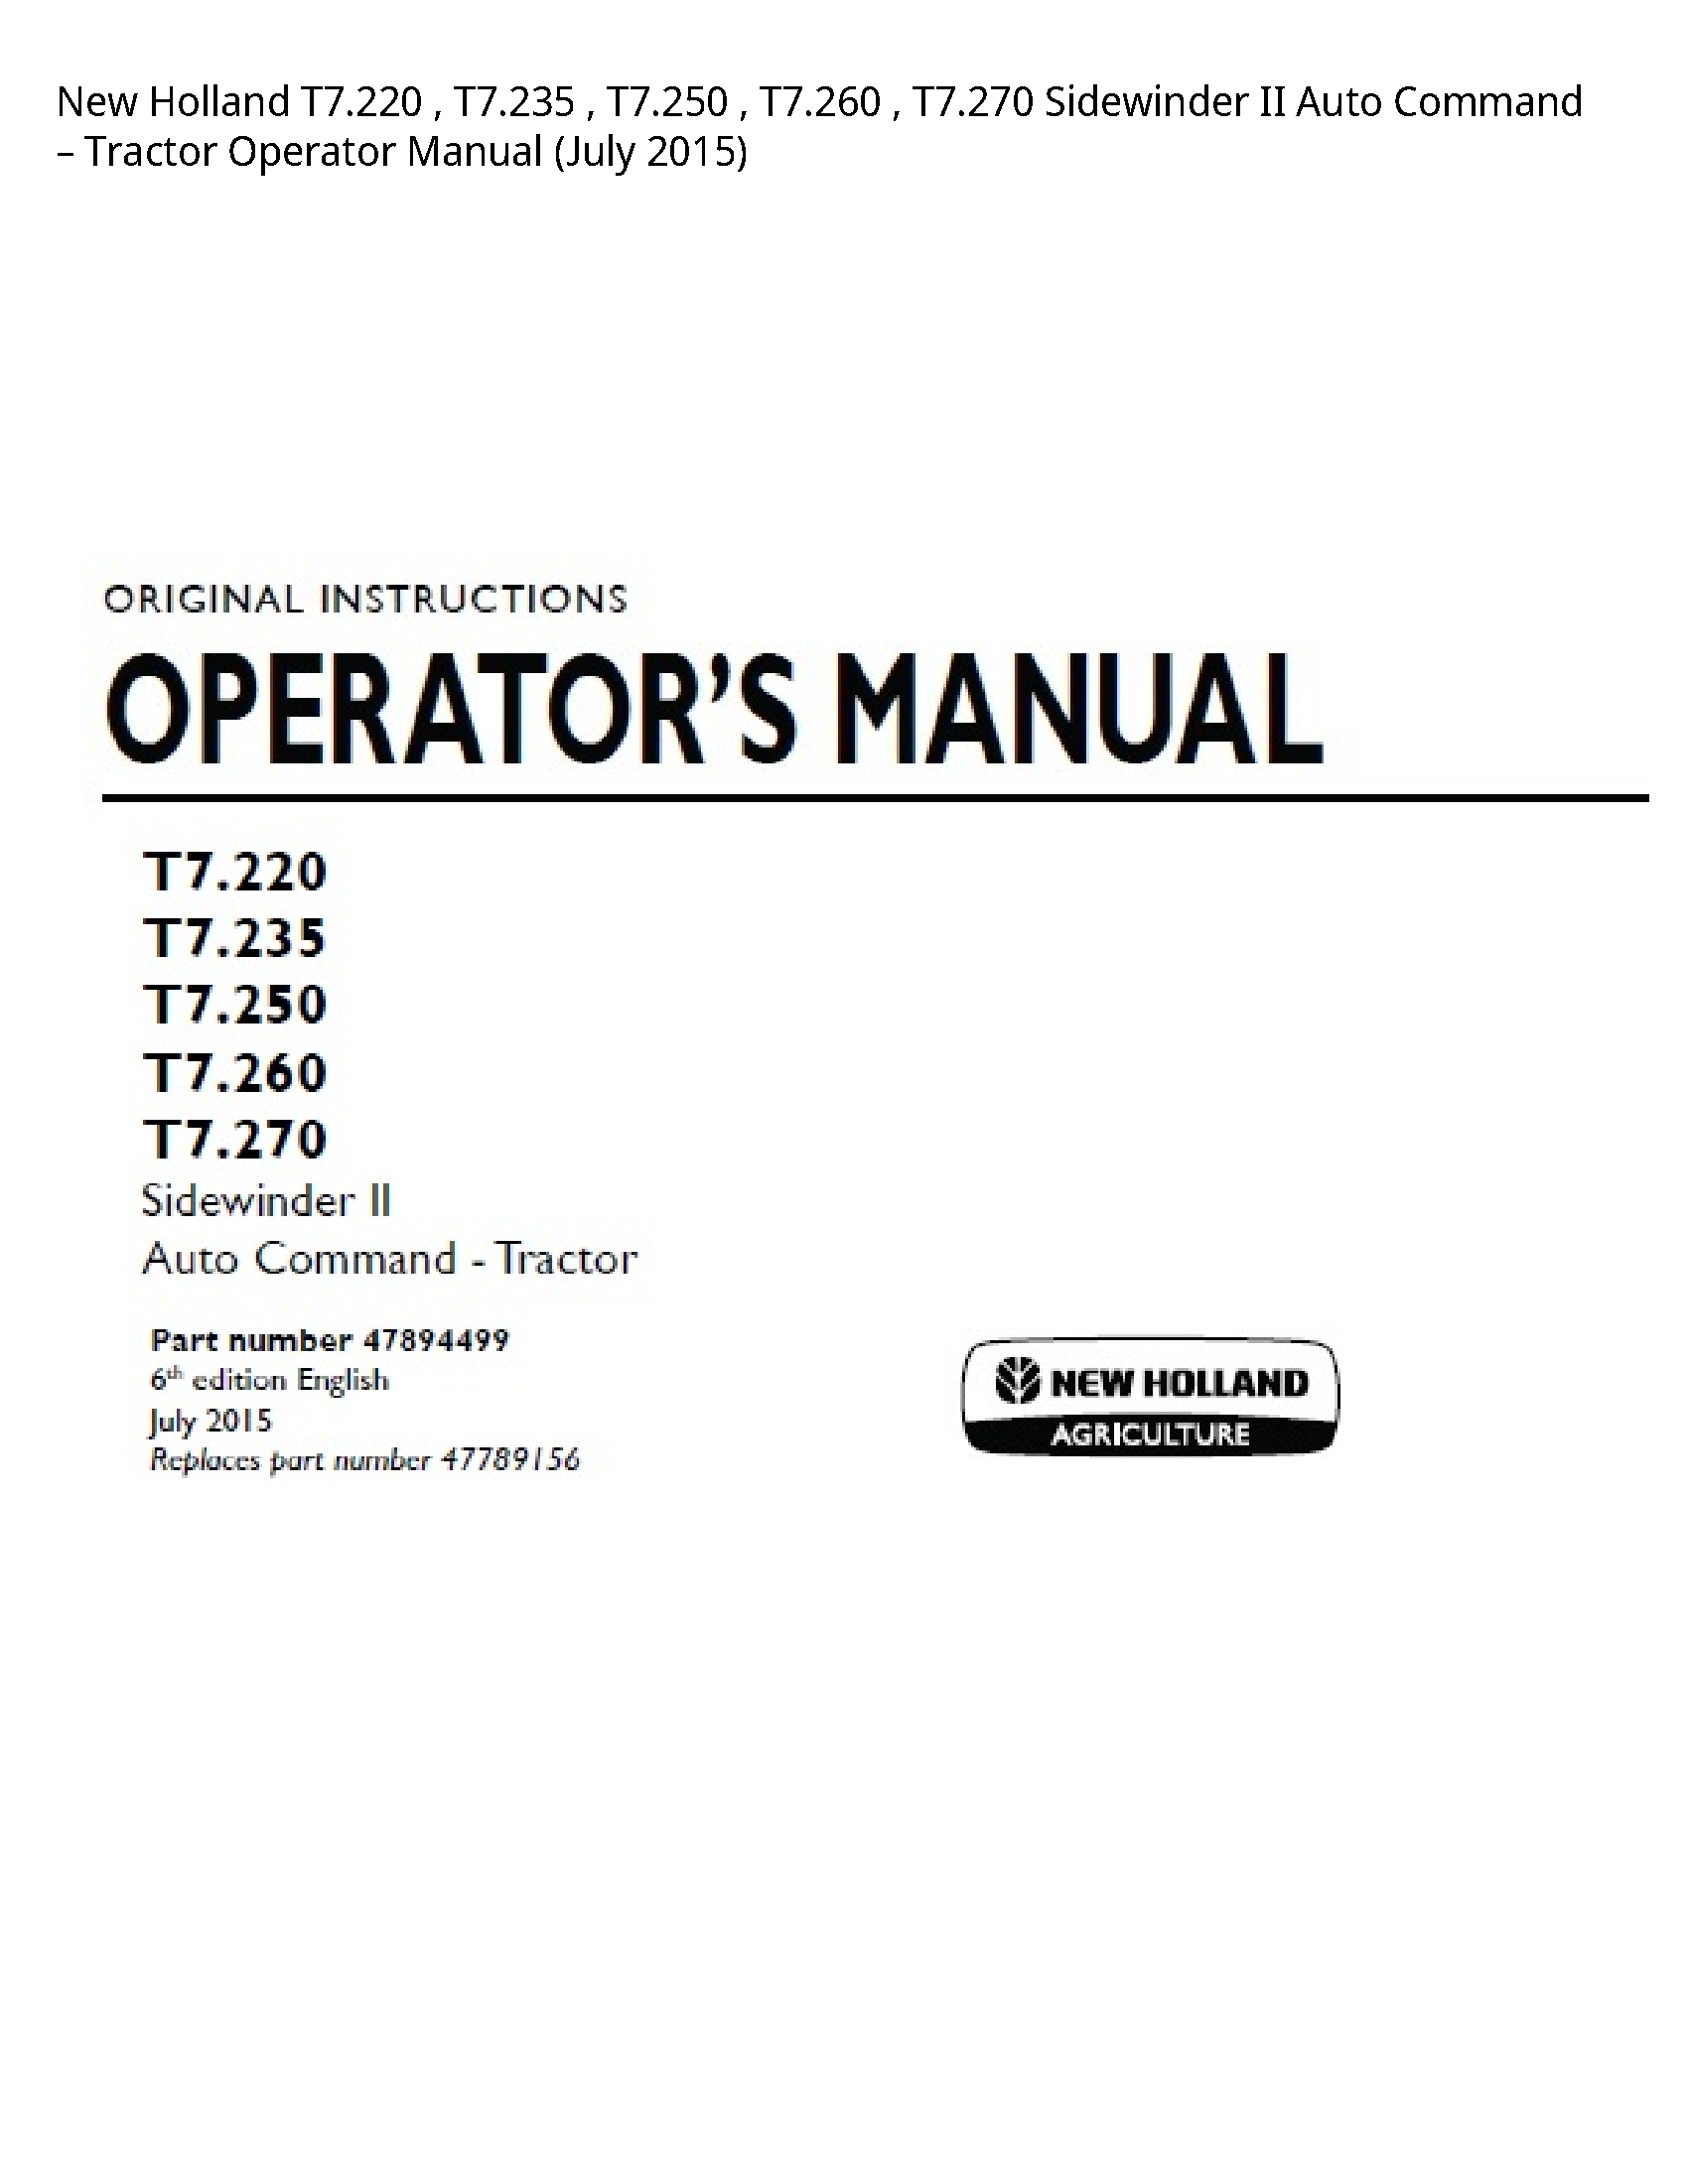 New Holland T7.220 Sidewinder II Auto Command Tractor Operator manual